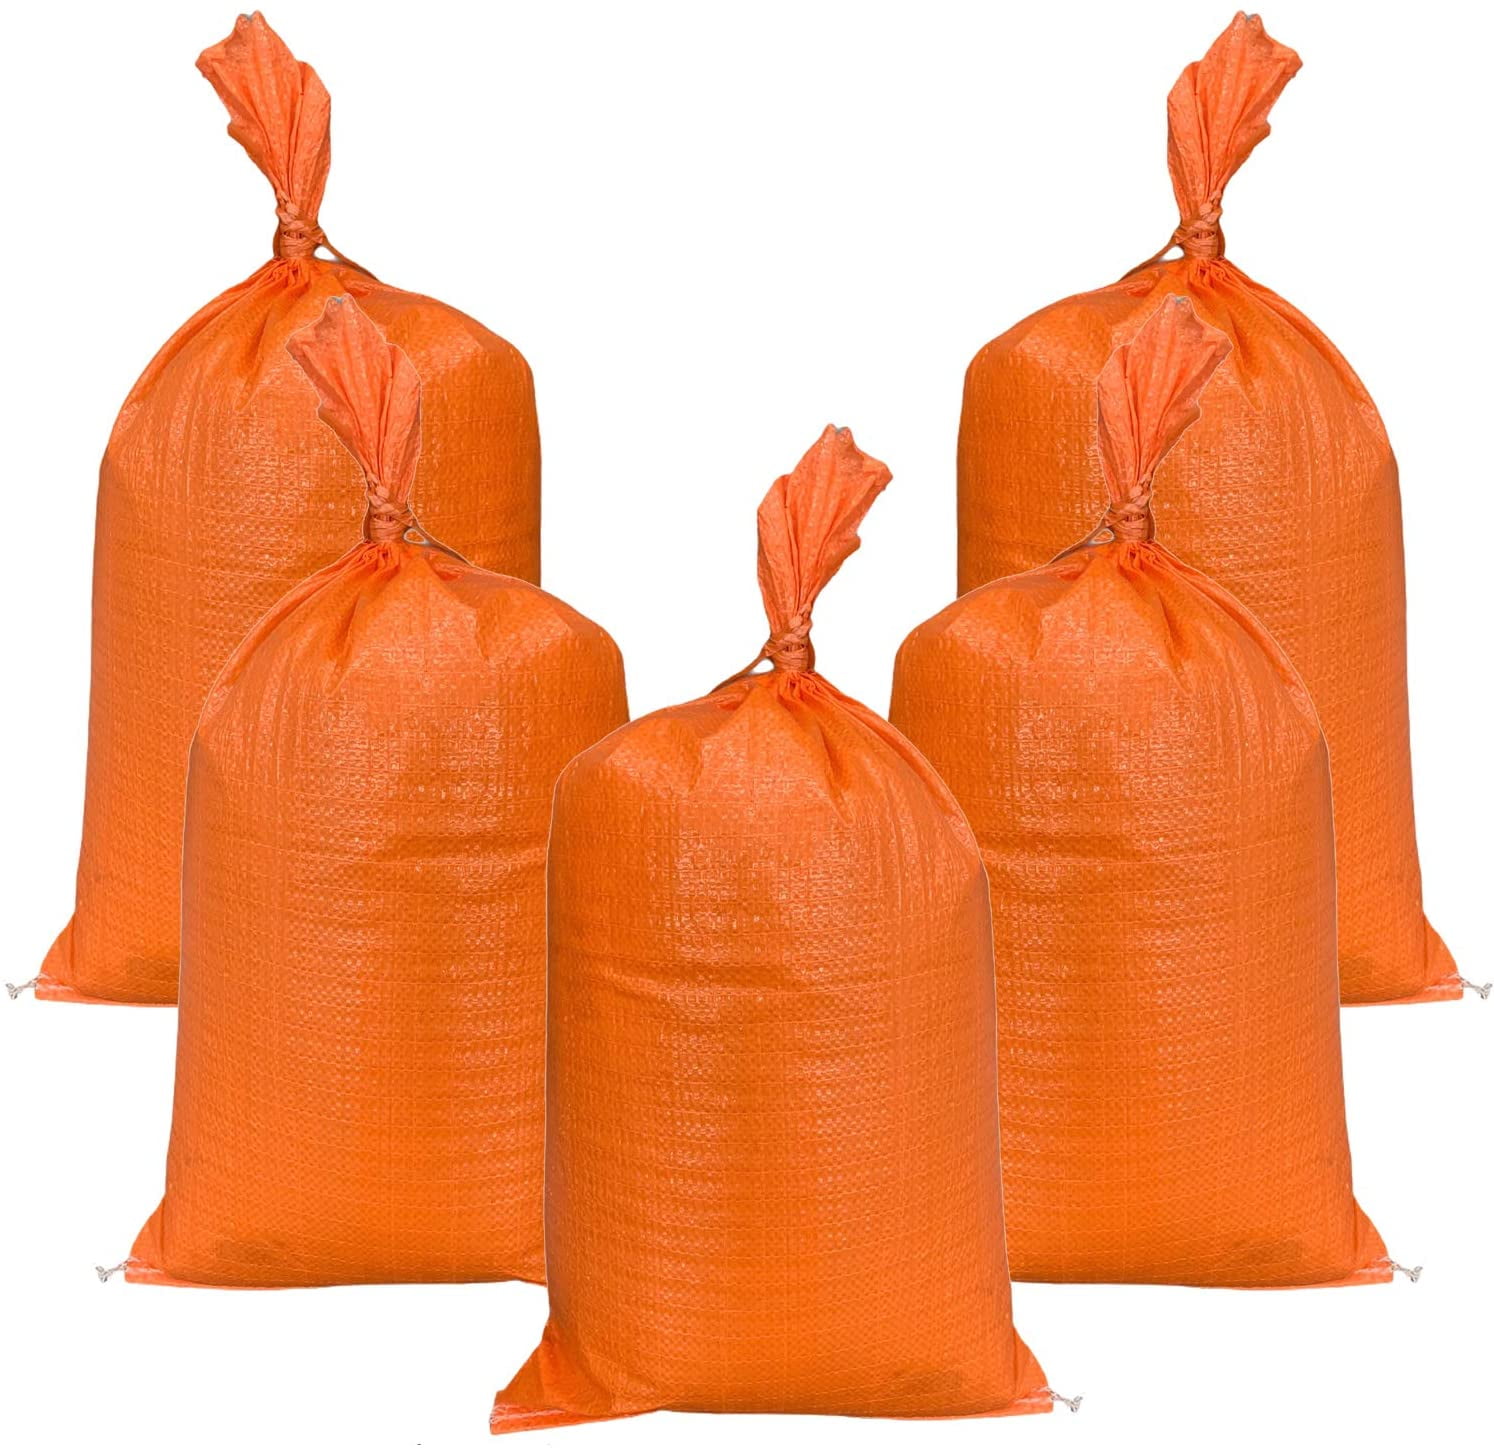 14 x 26 Poly Sandbags W/UV Protection & Built-in Ties Tent Sandbags TAN AK TRADING CO Flood Water Barrier Pack of 50 